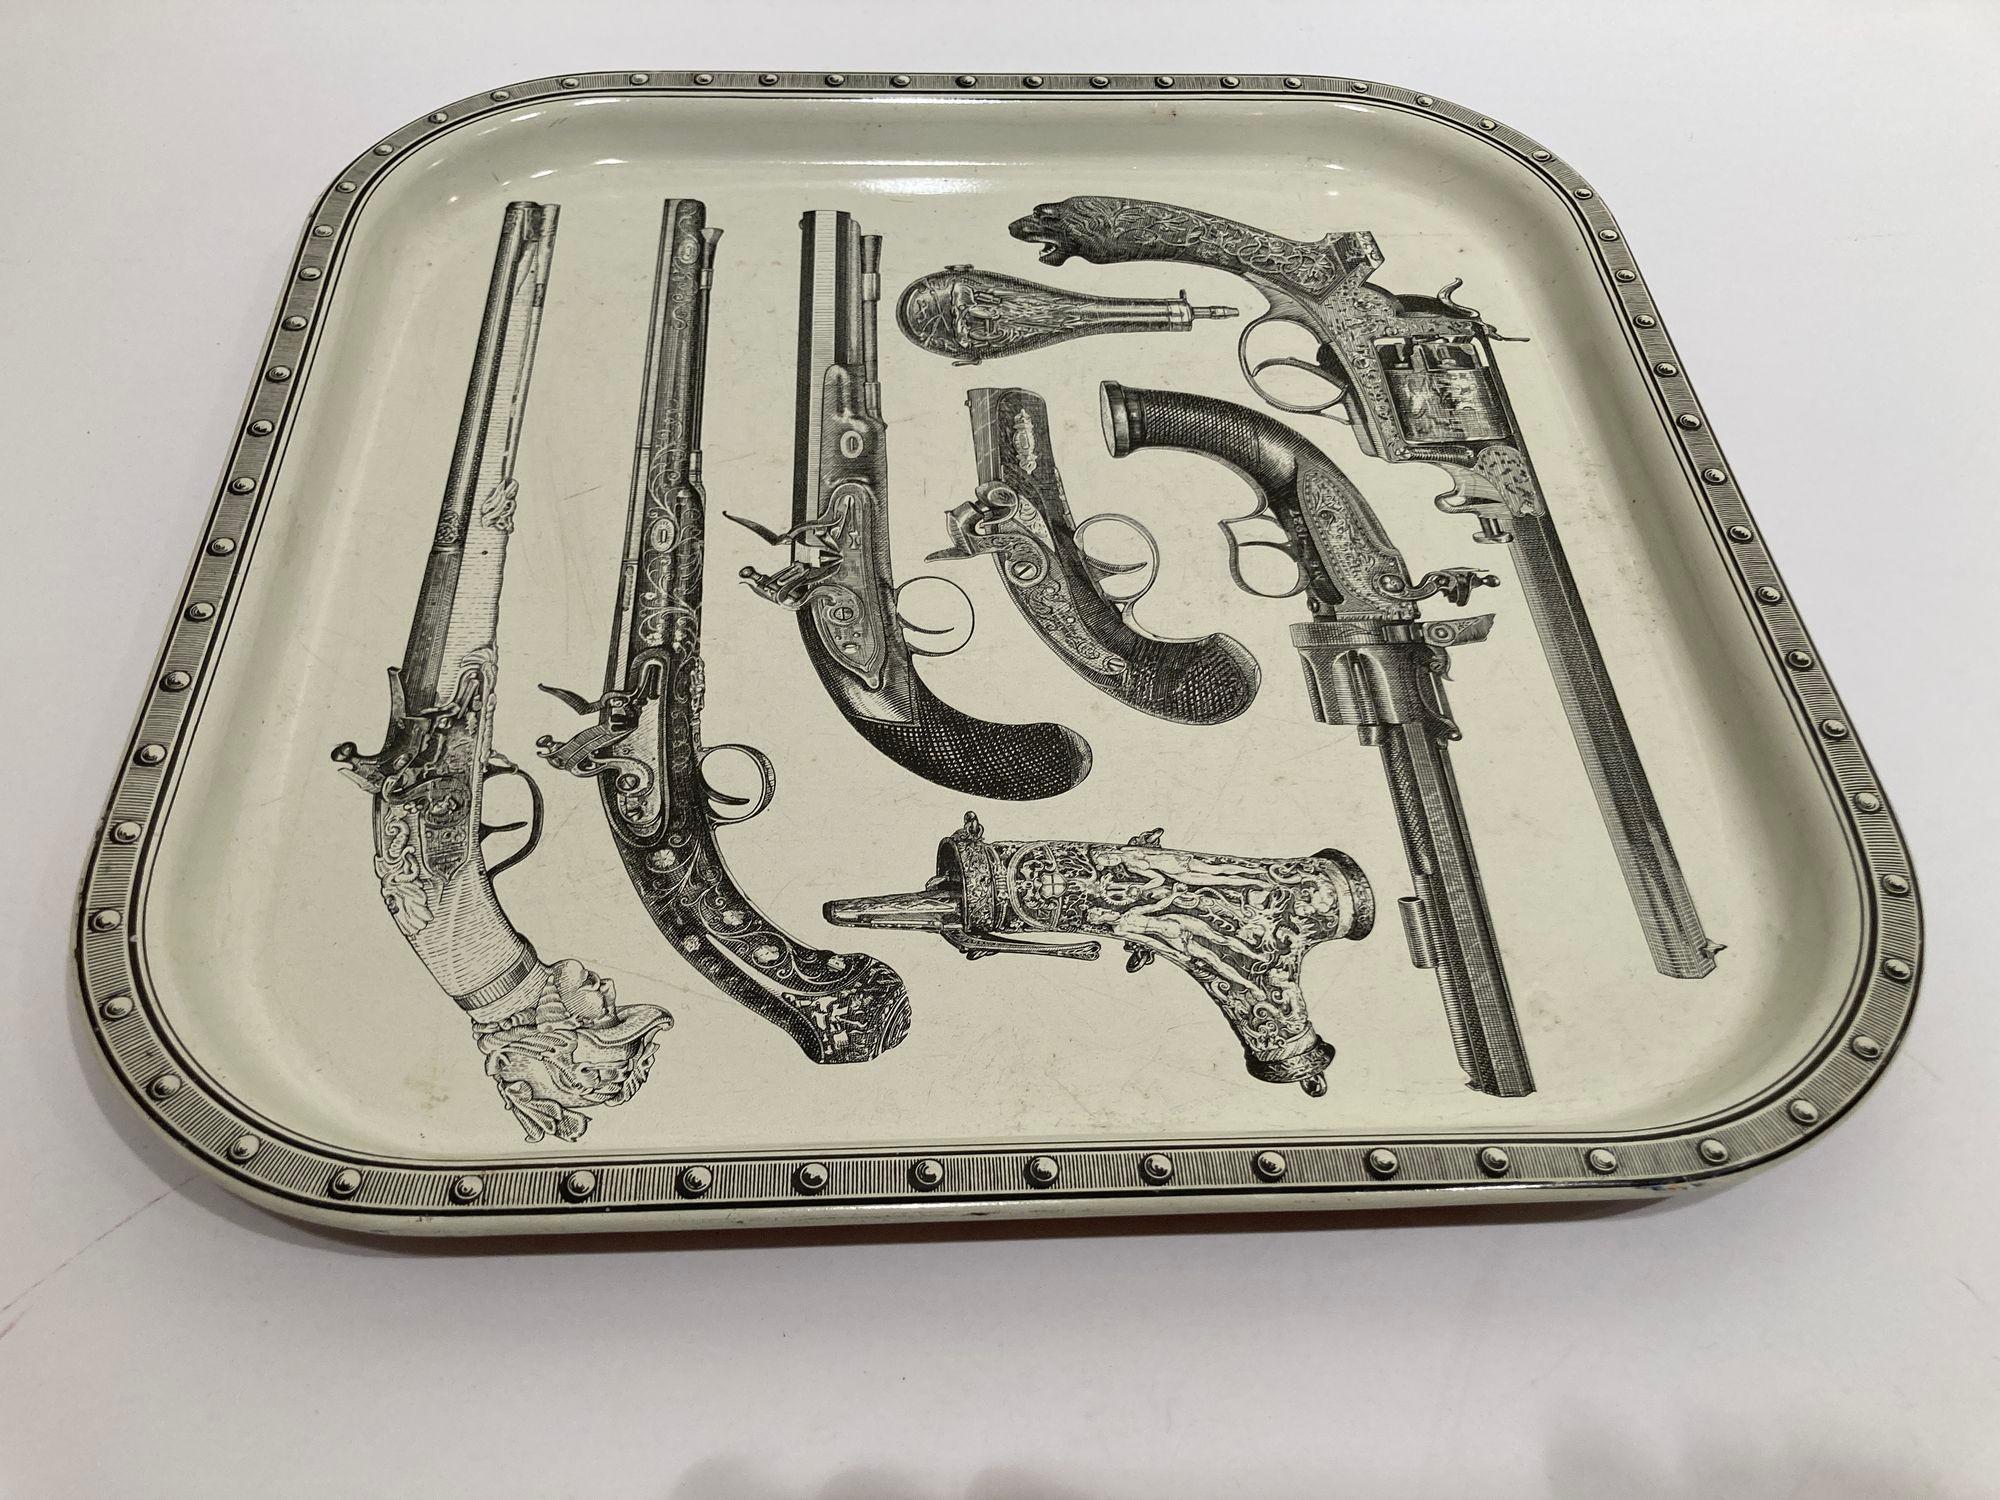 Mid-Century Modern Piero Fornasetti Attributed Pistol Barware Metal Serving Tray, 1960s For Sale